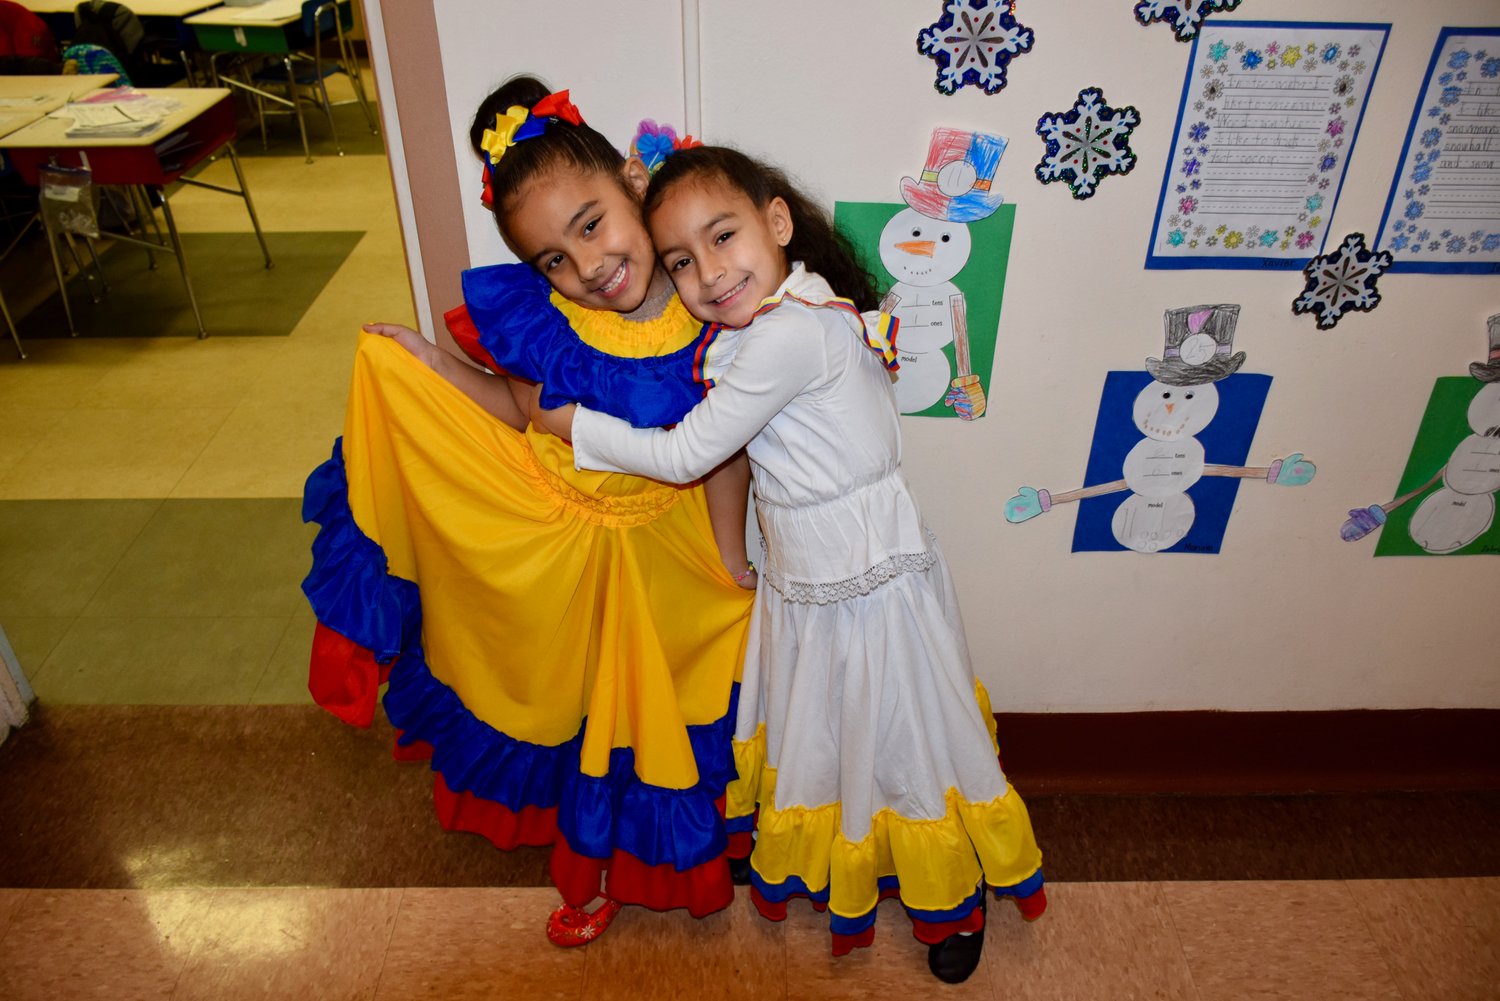 These two girls hugged it out and wore their countries’ colors with pride on Cultural Diversity Day at Covert Avenue School.